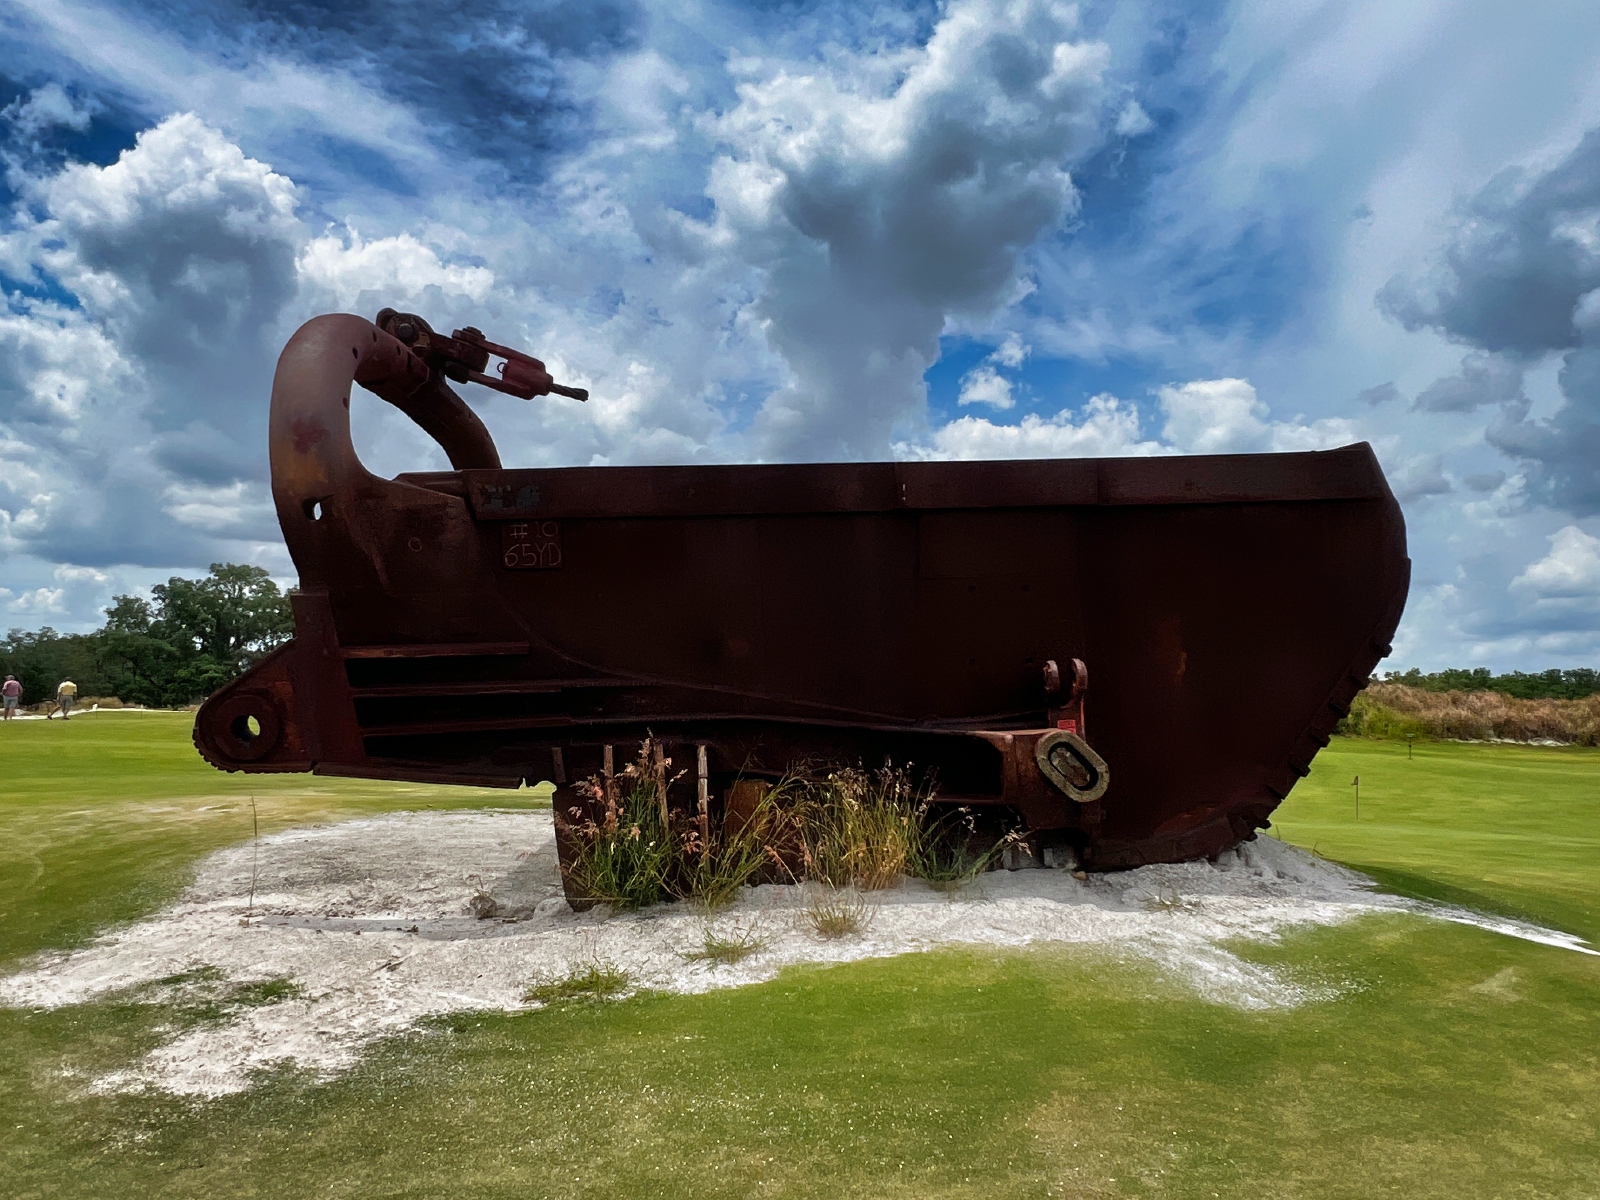 The Bucket putting course at Streamsong's The Chain